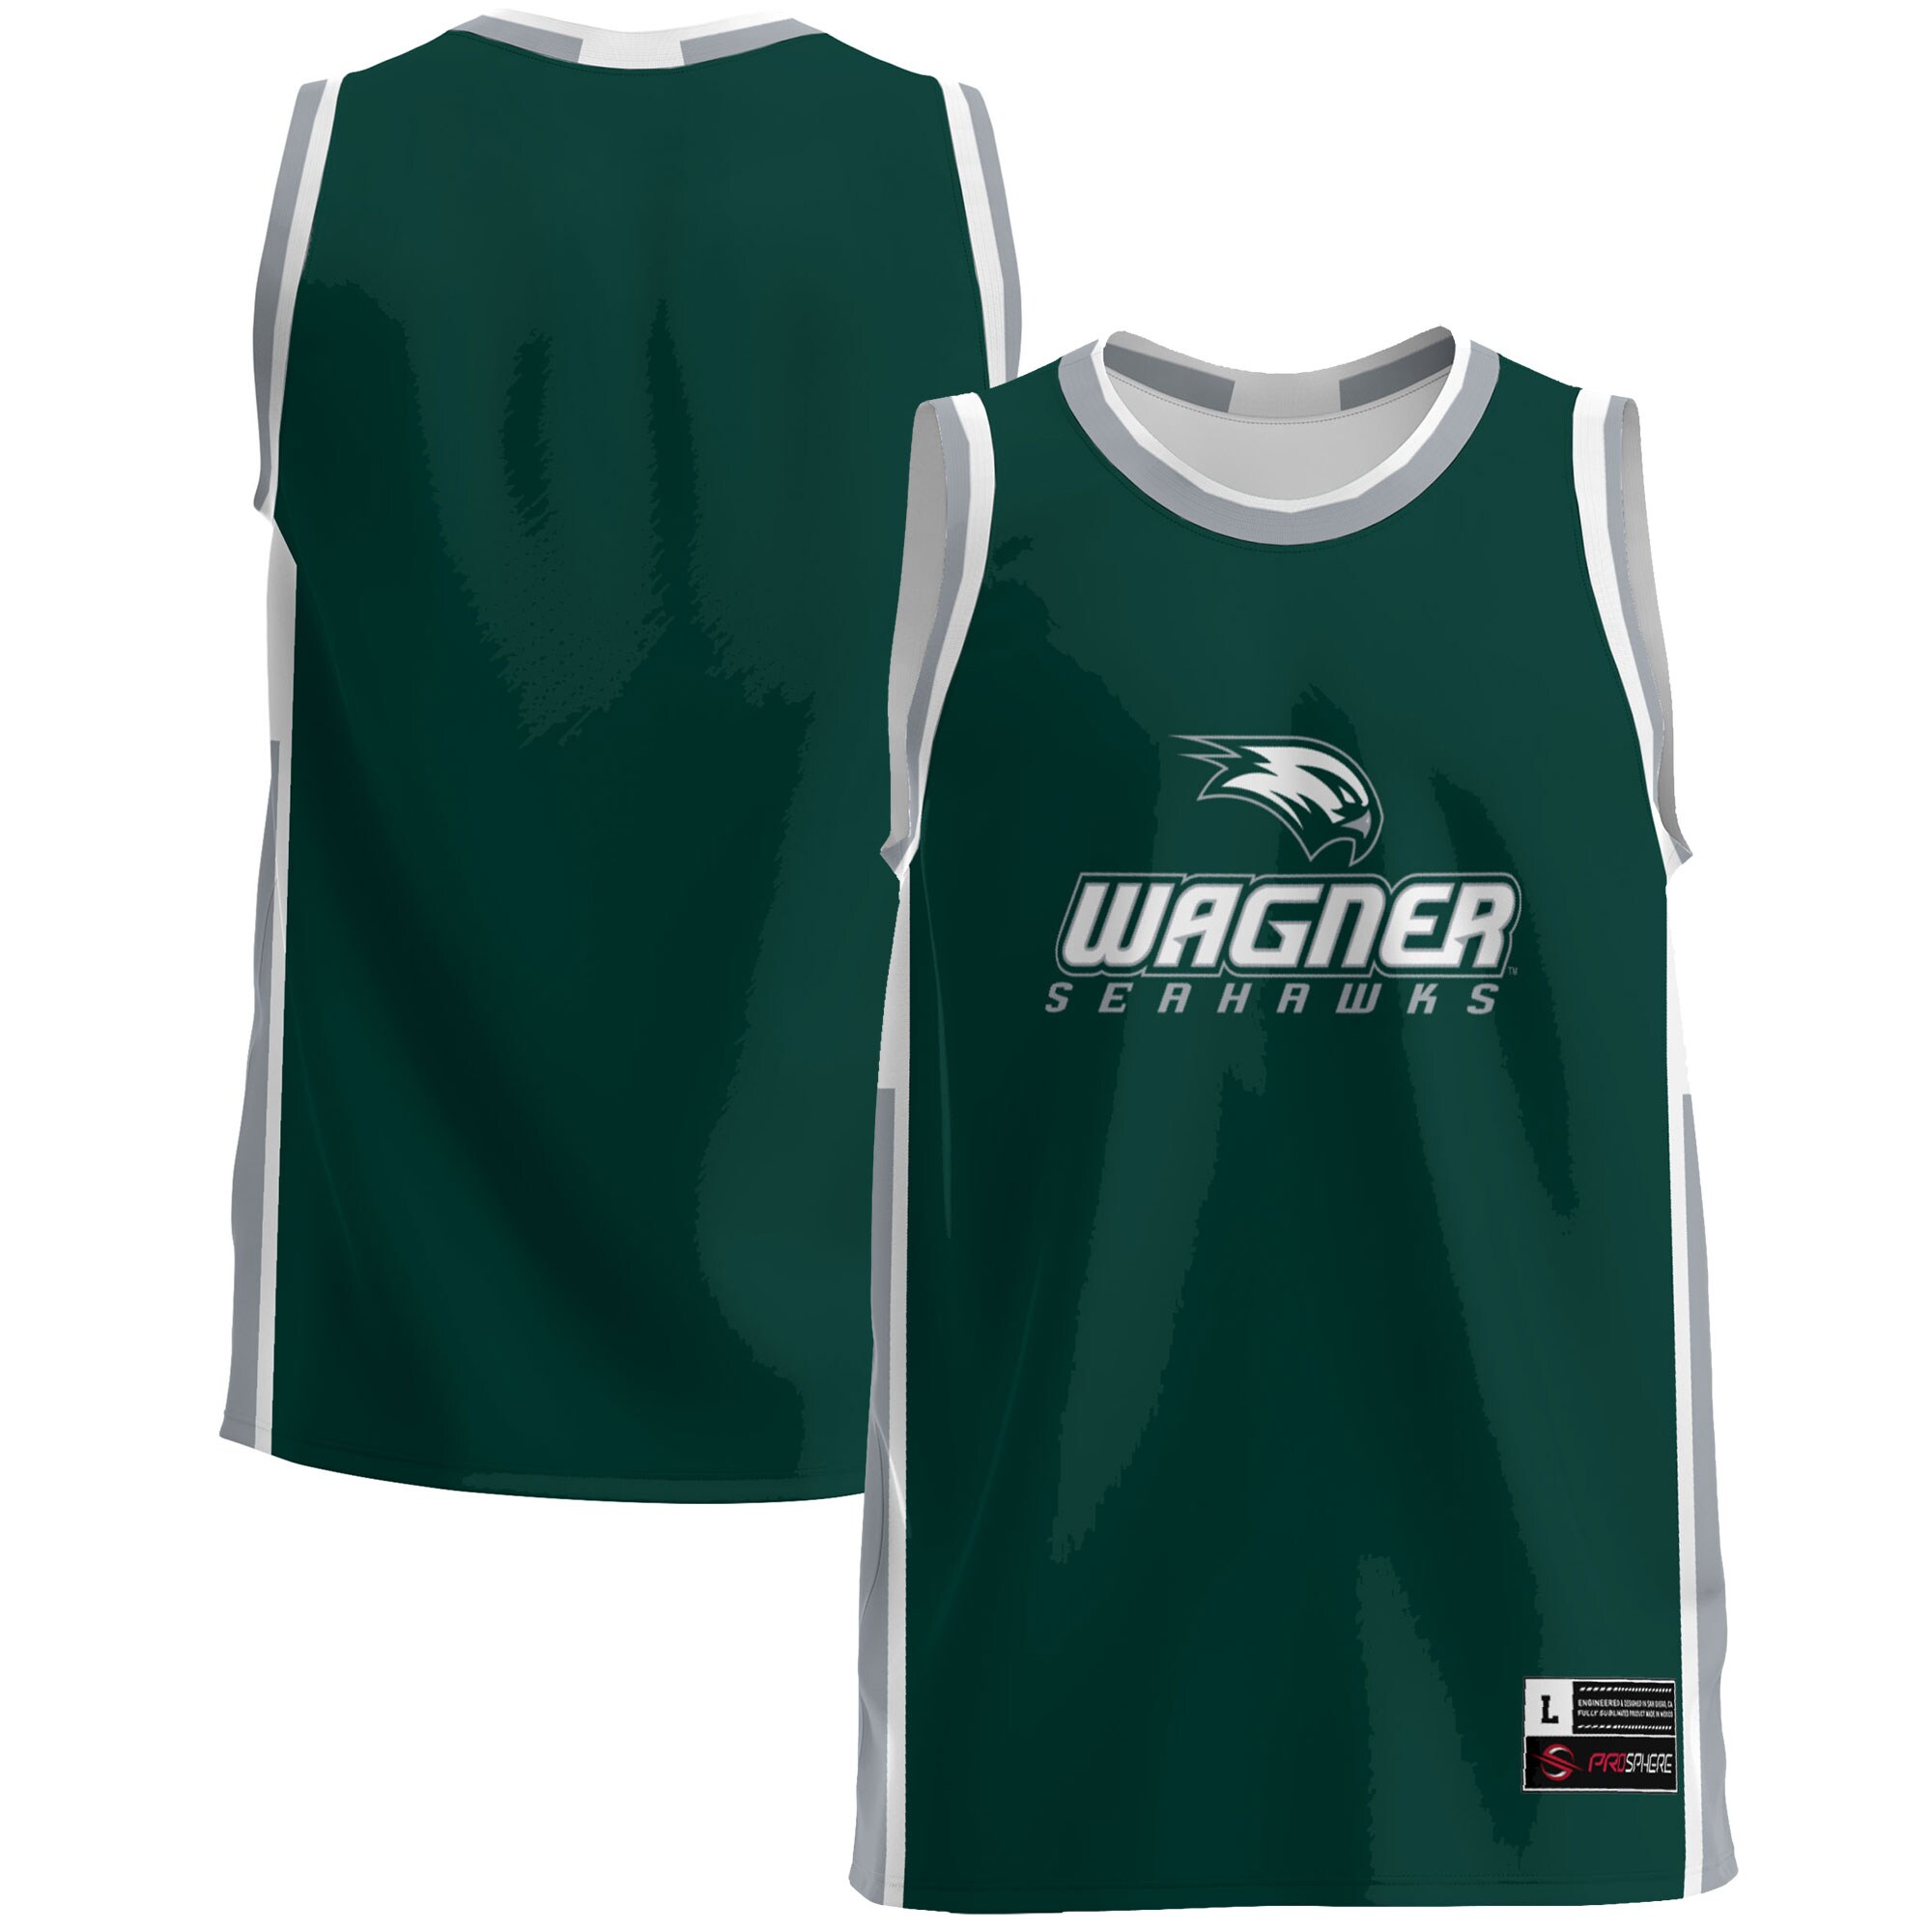 Wagner College Seahawks Basketball Jersey - Green For Youth Women Men